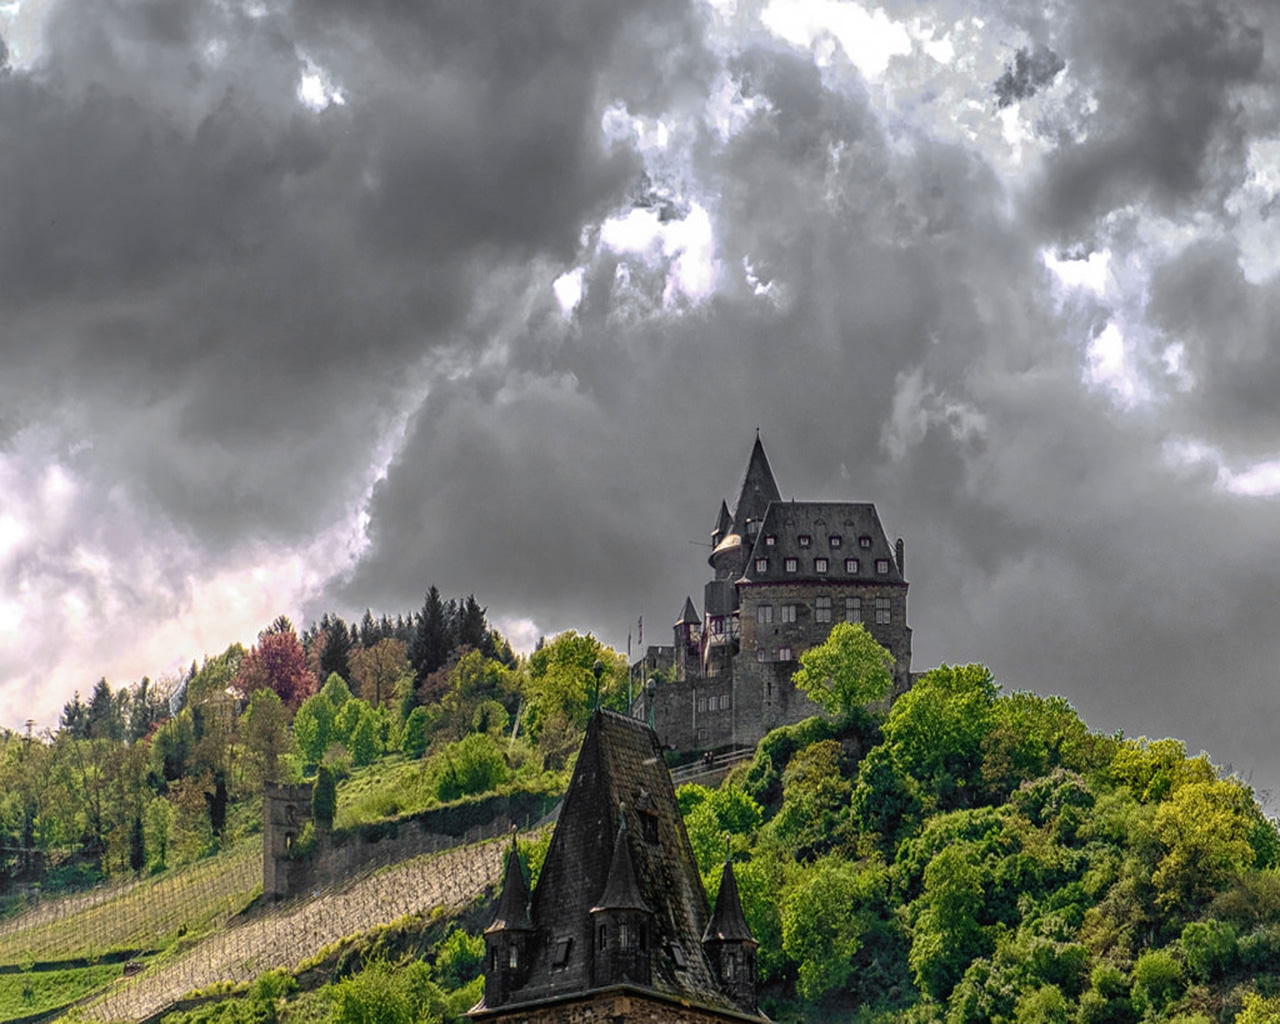 Burg Stahleck, history, architecture, the past, cloud - sky, religion